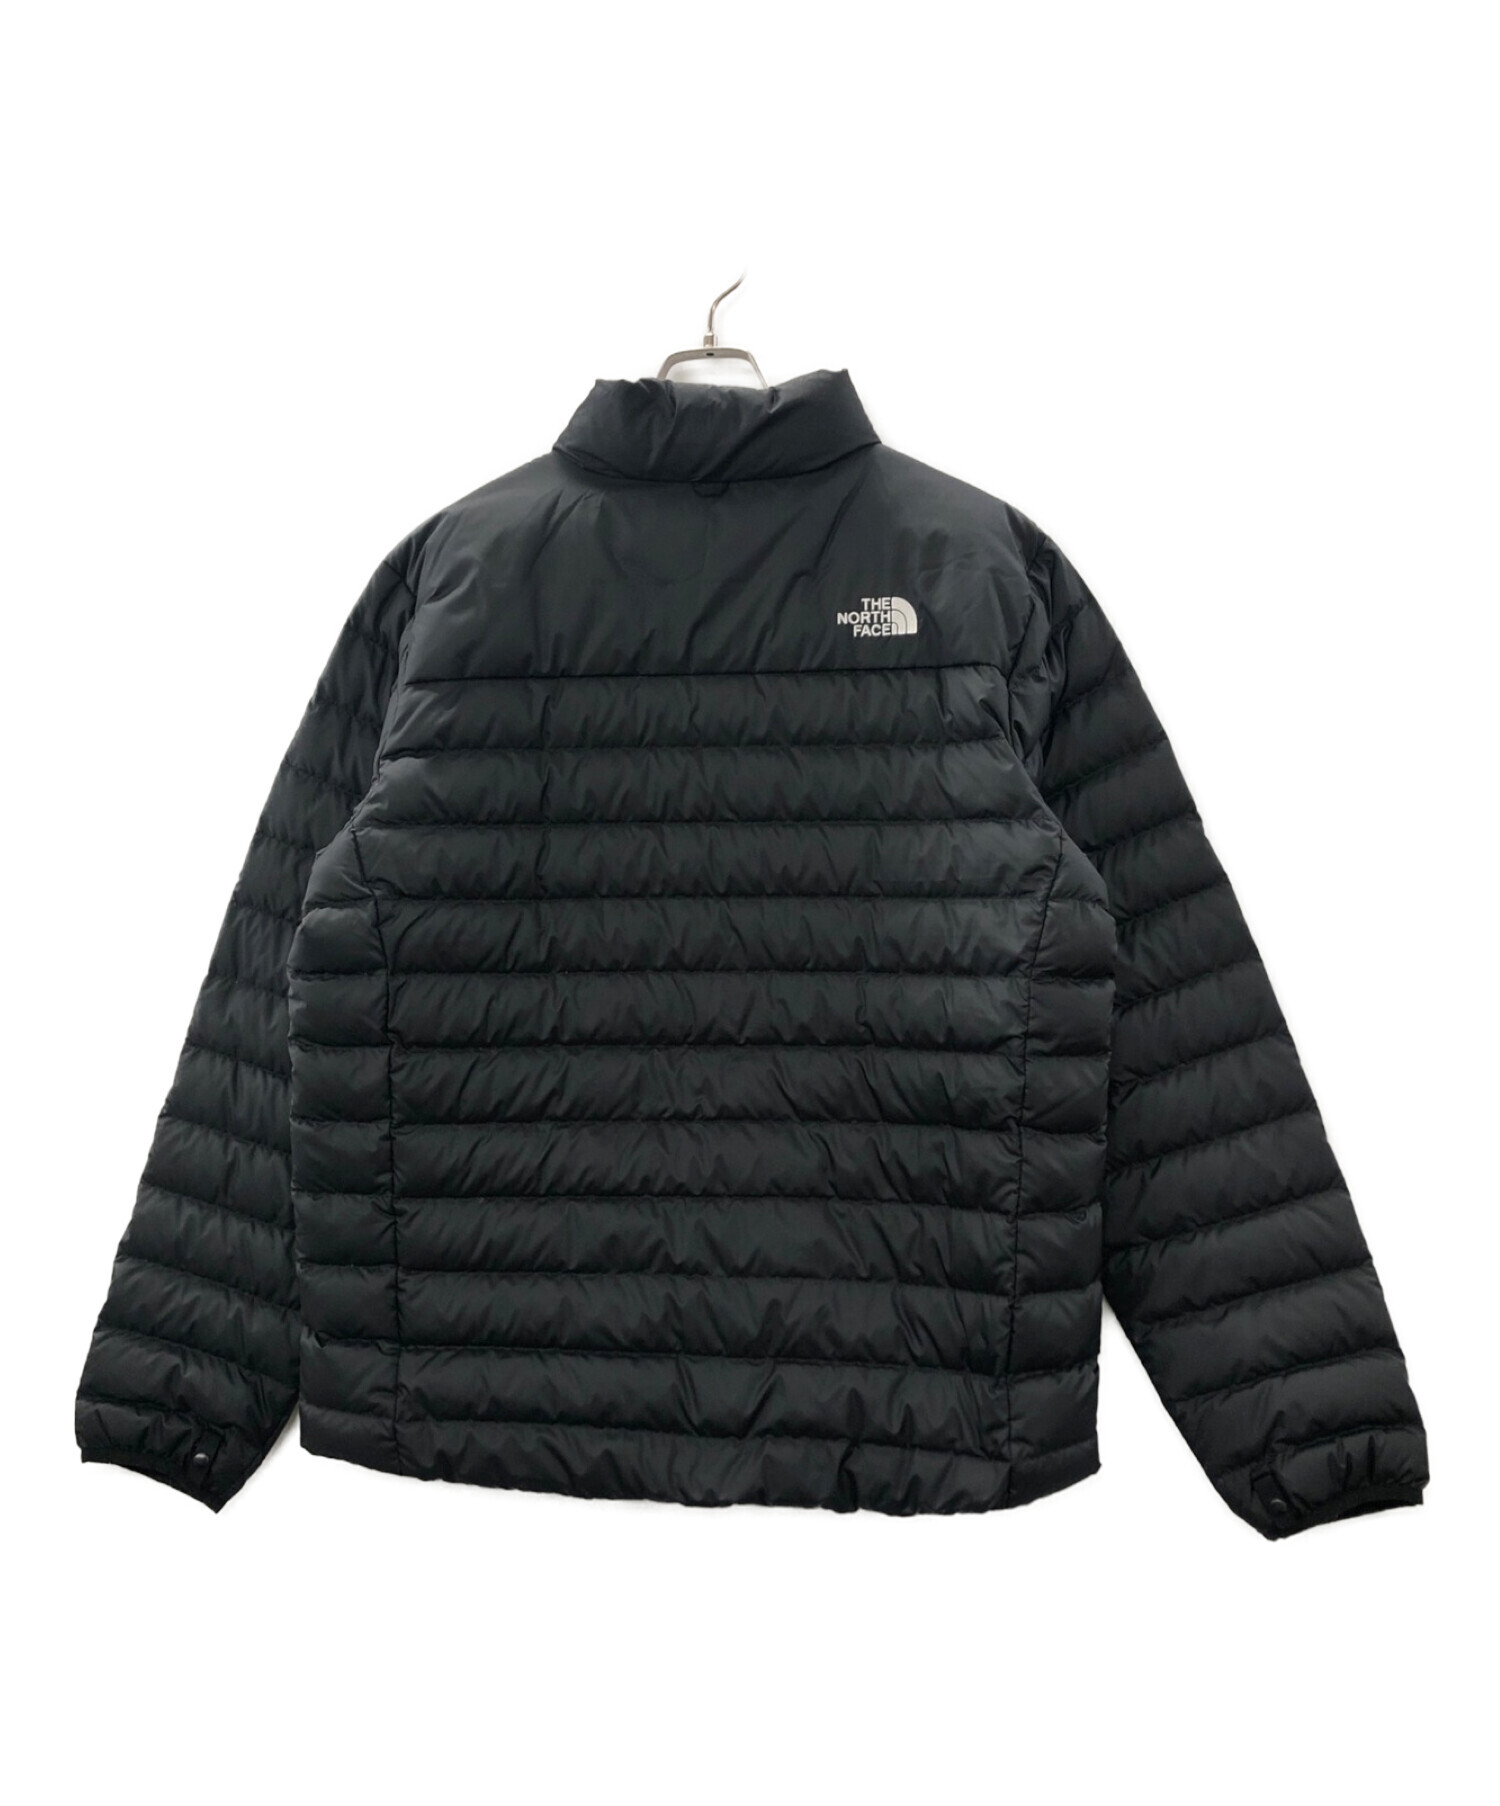 ■THE NORTH FACE-FLARE JACKET【XXL/限定/グレー】動作確認